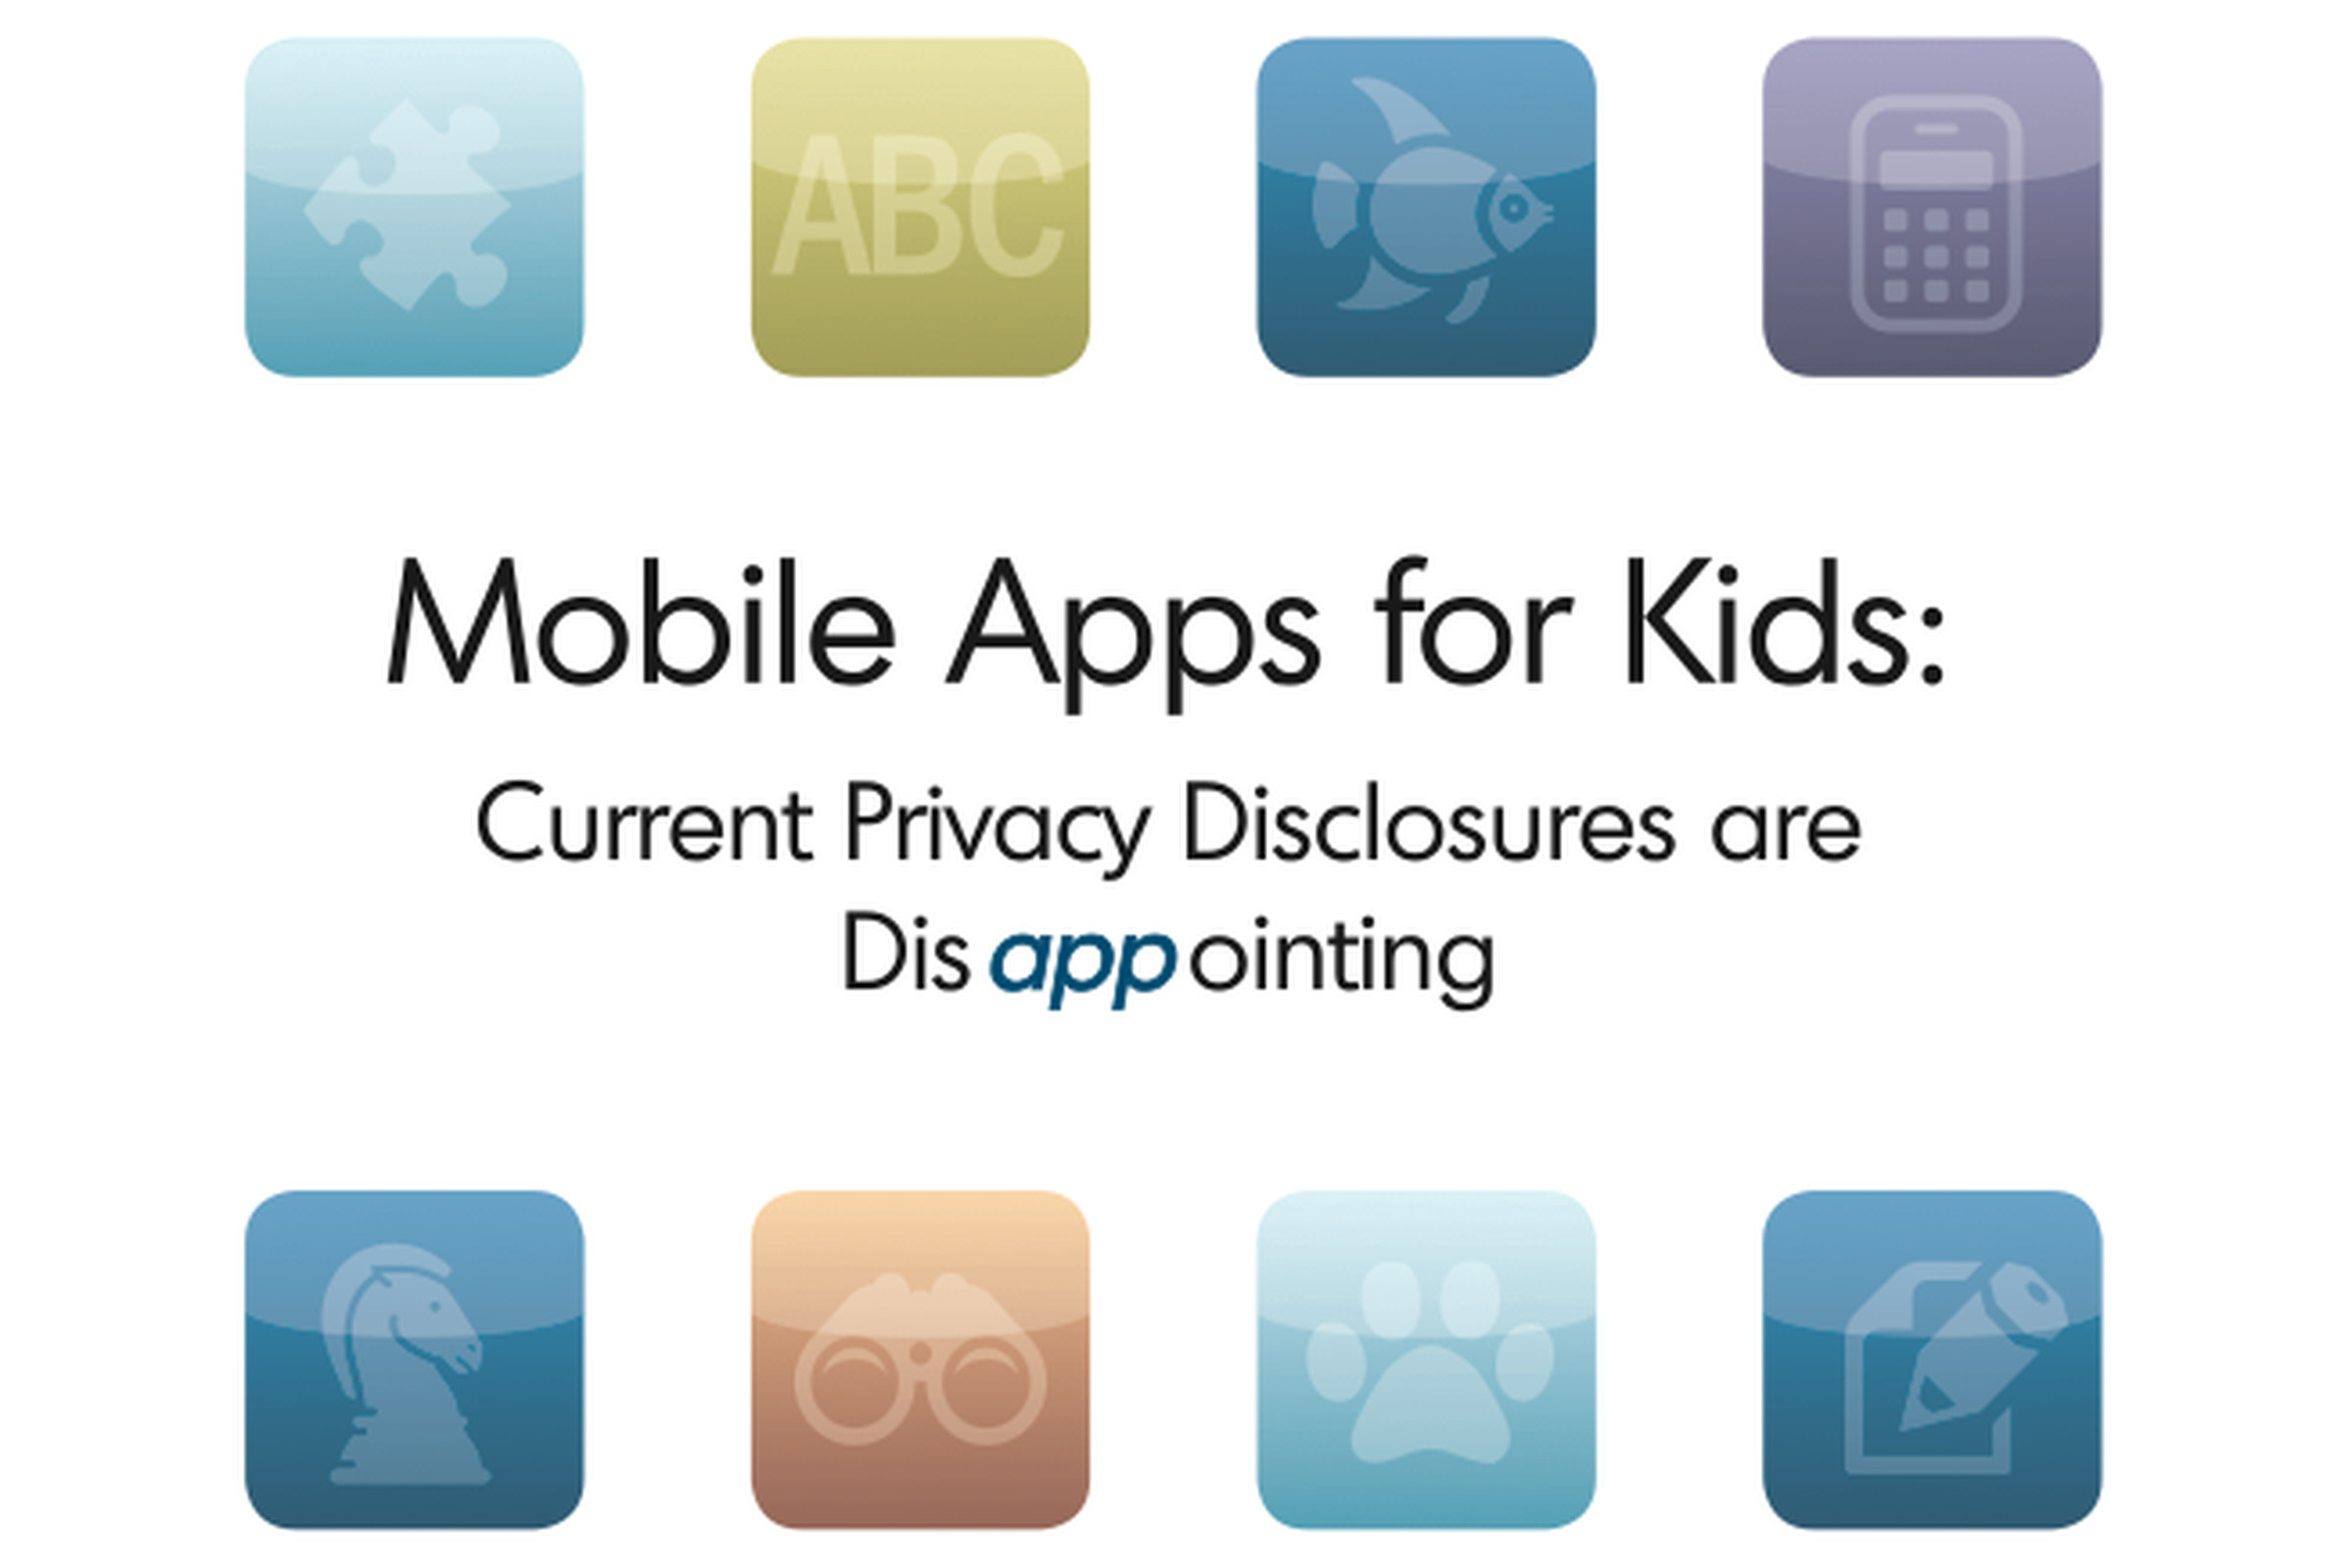 FTC child apps privacy report